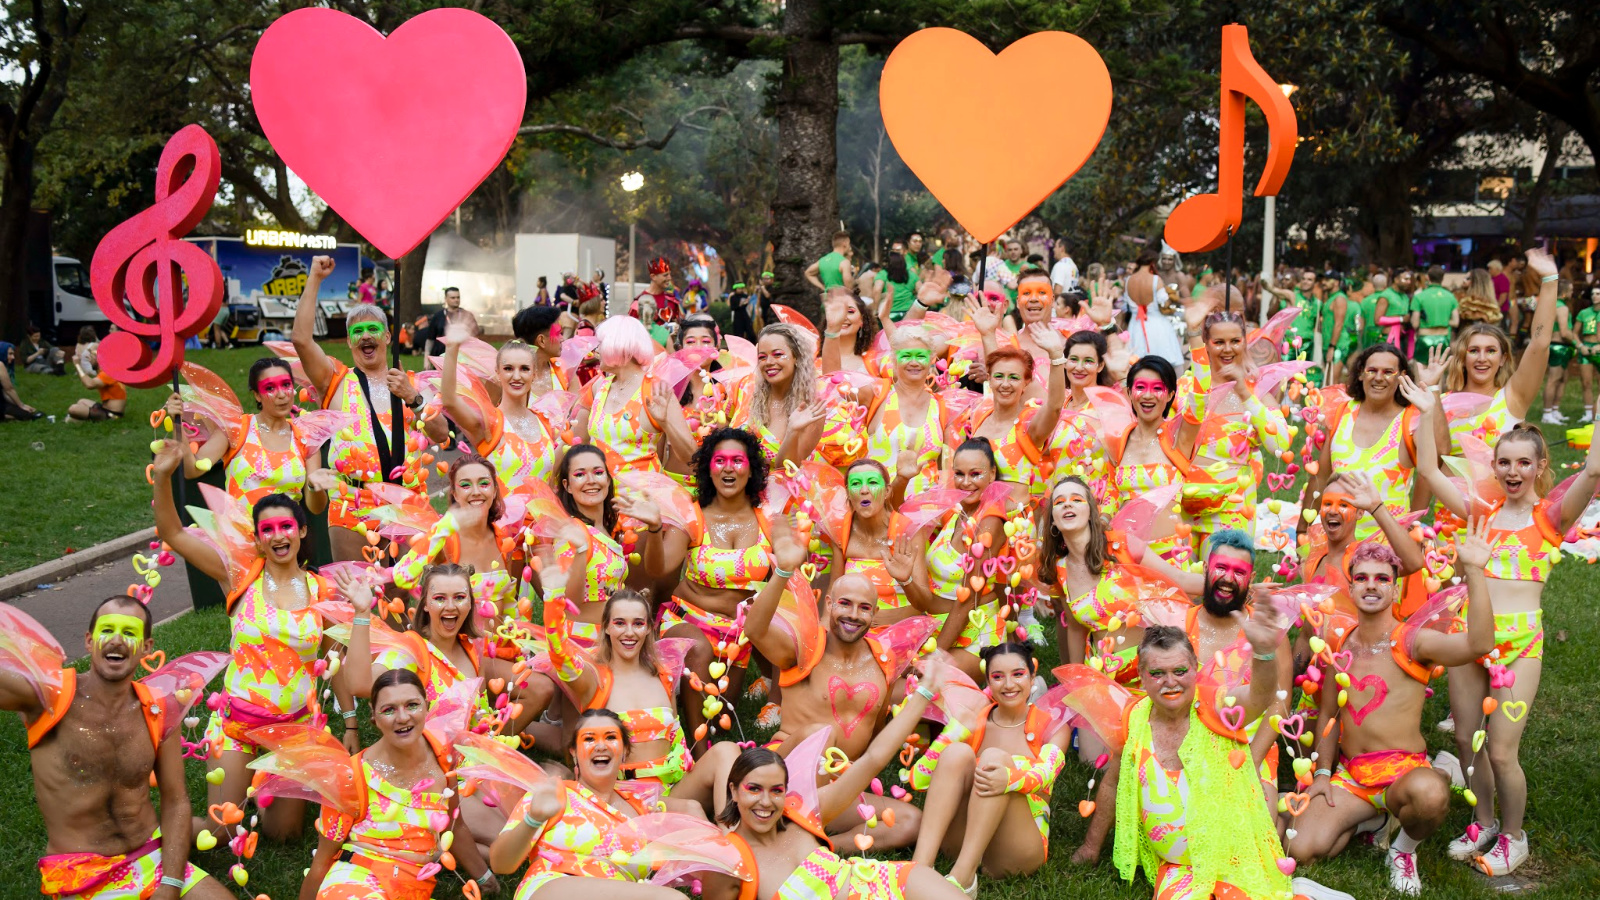 A group of people wearing neon, heart-shaped accessories posing for a picture.